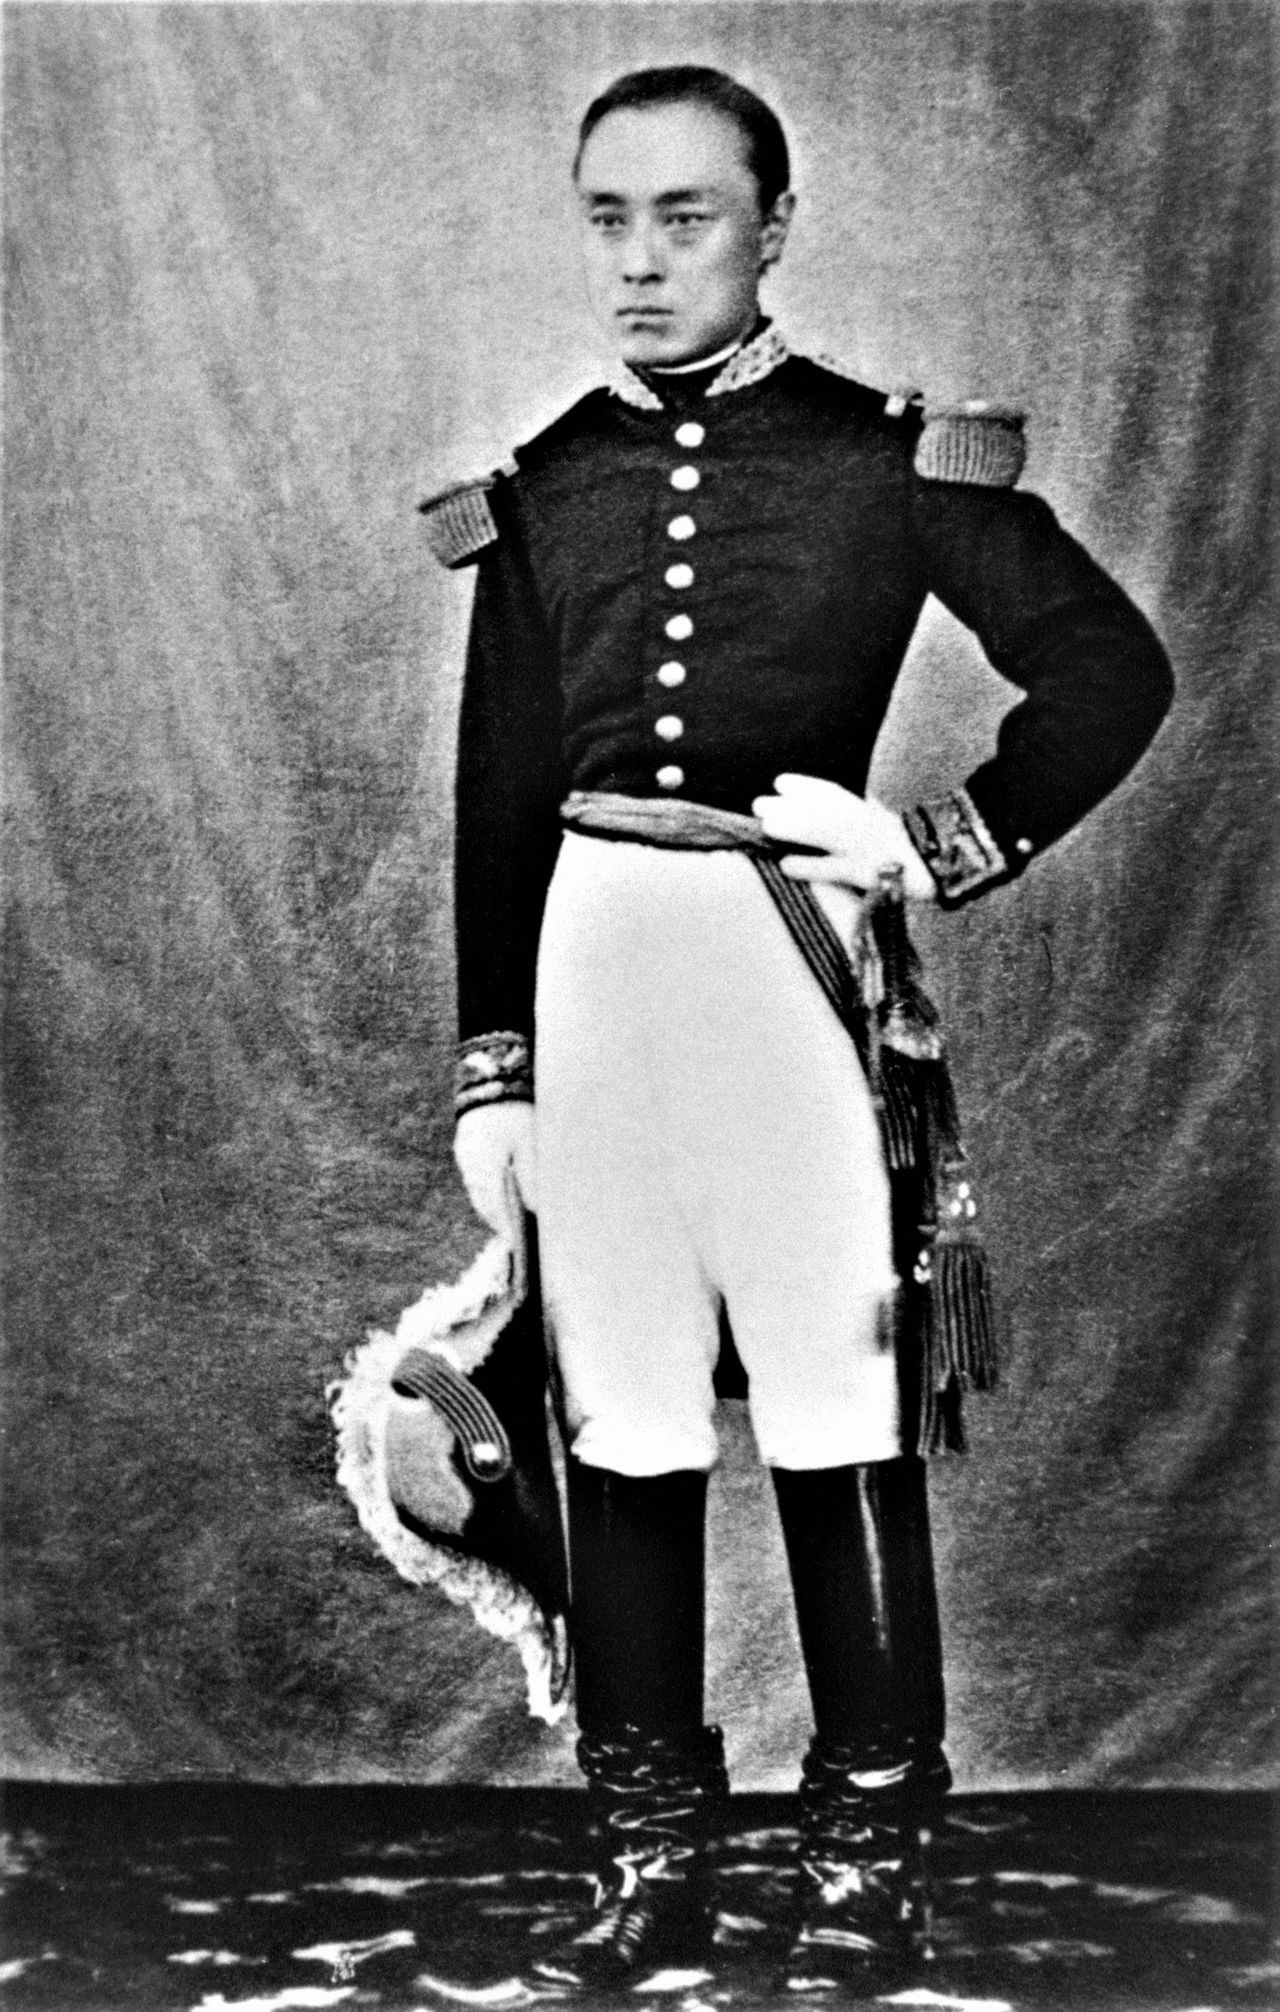 Yoshinobu in a military uniform given to him by Napoleon III of France. (Courtesy Ibaraki Prefectural Archives and Museum; © Jiji)